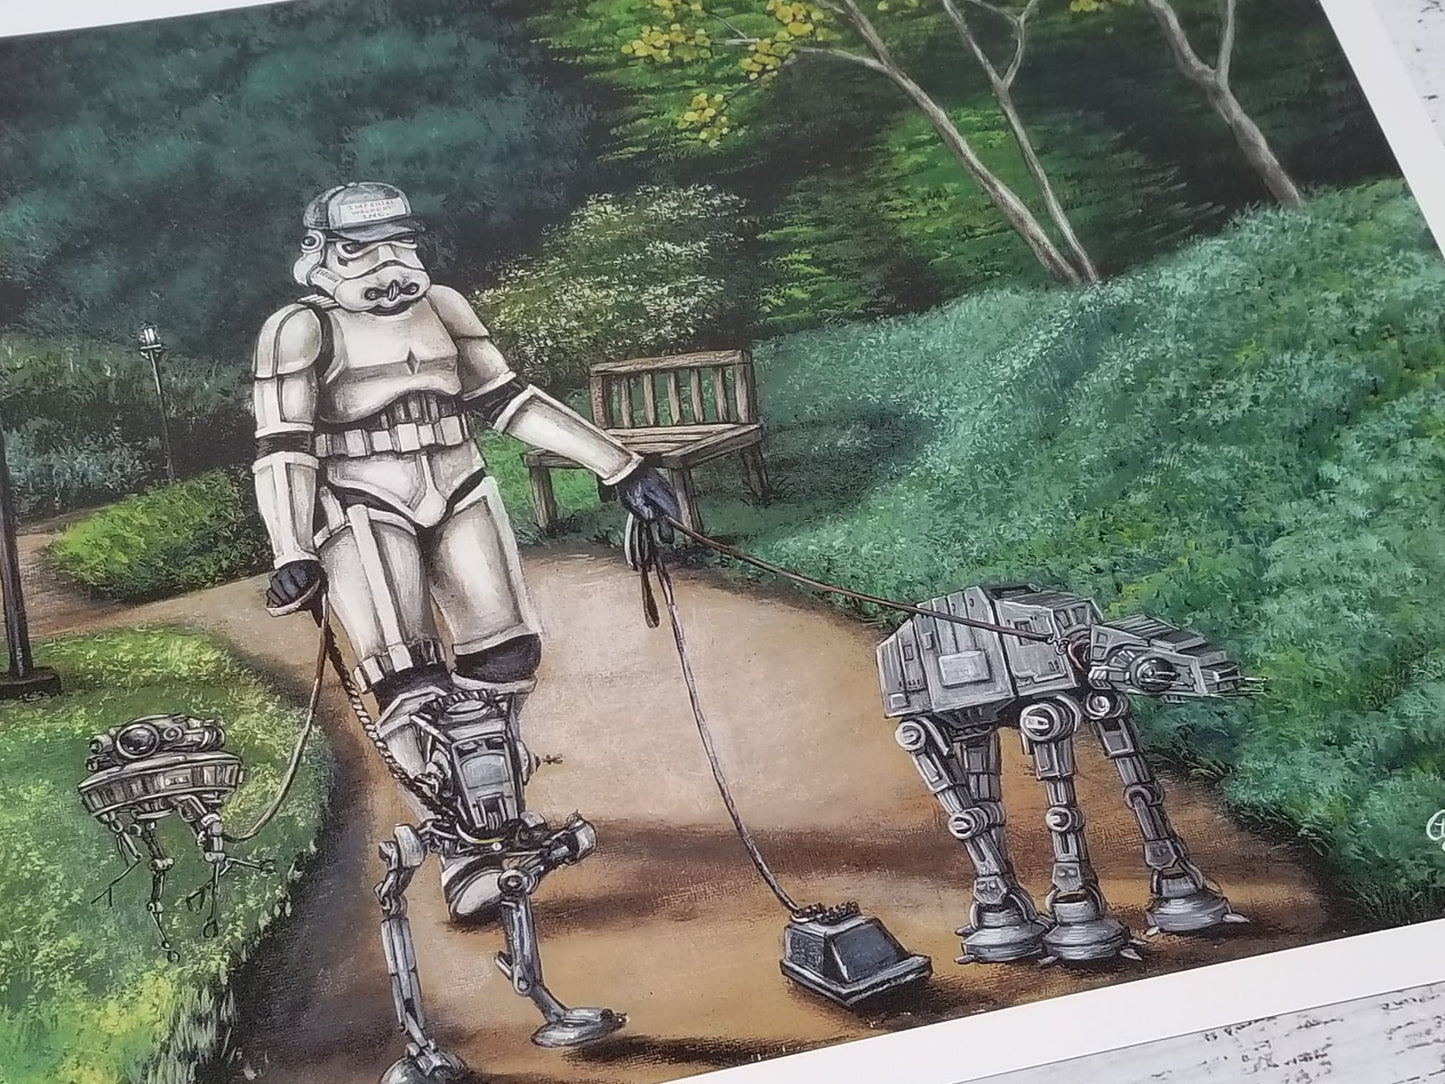 "Imperial Mark" Star Wars Parody Art Print by Ashley Raine  Our trusty Pup Walker Trooper from Imperial Walkers Inc. is out for an afternoon in the park with four of his imperial buddies. The probe droid and AT-ST 'Chicken Walker' are walking behind a bit, while MSE-6 'Mouse Droid', & our favorite AT-AT are ready to explore ahead and sniff out any rebel scum in the next shrubbery. 